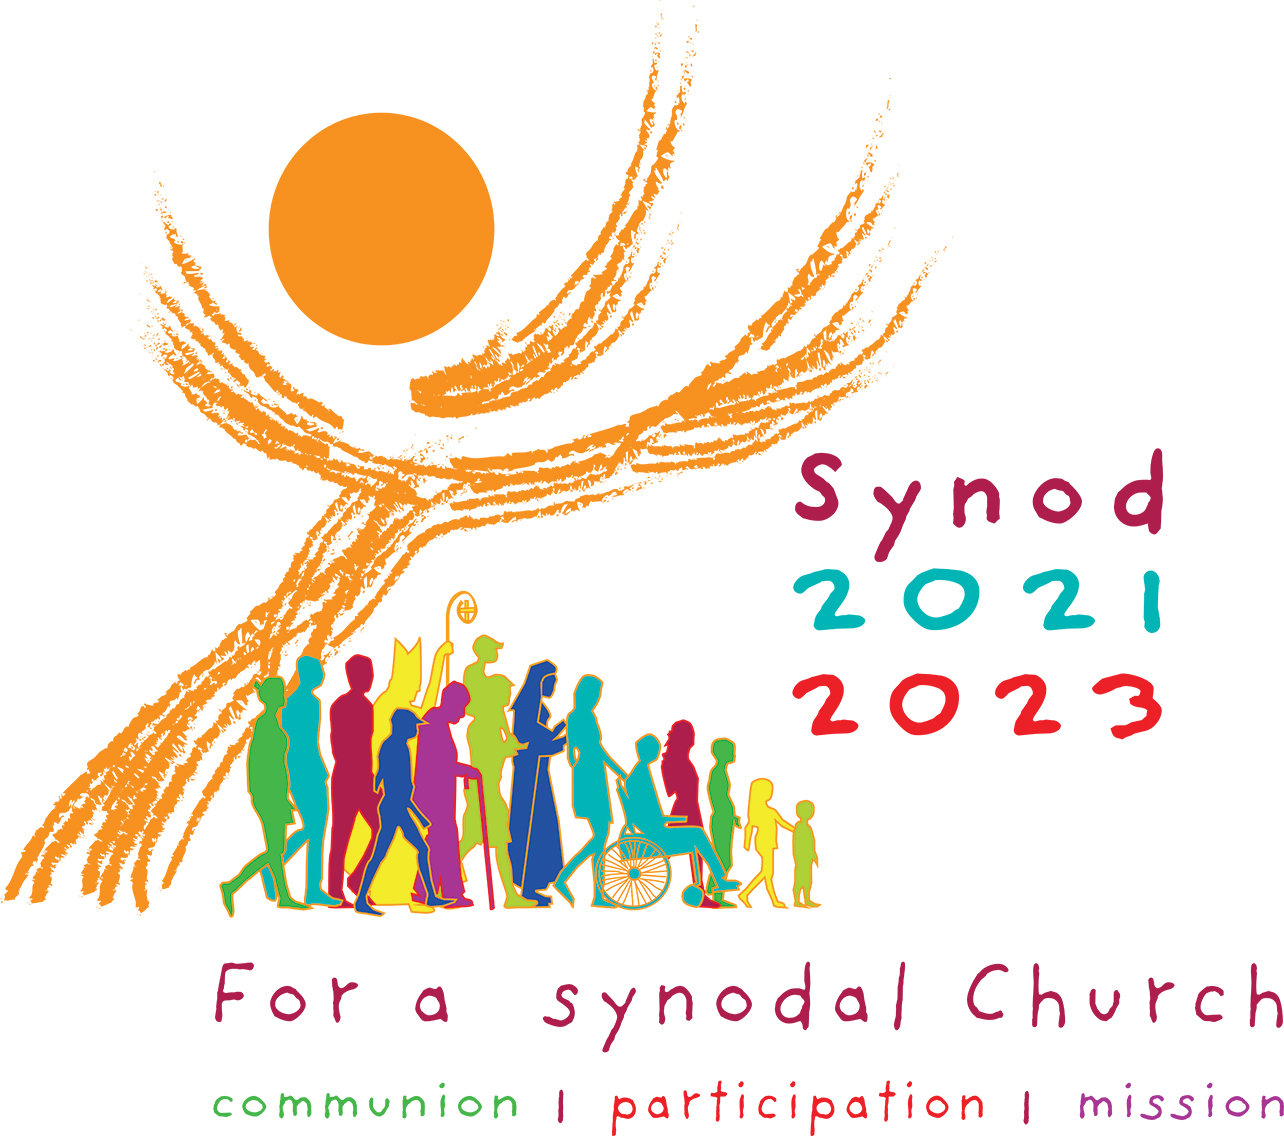 SYNOD PREPARATION—This is the official logo for the XVI Ordinary General Assembly of the Synod of Bishops. Listening sessions are taking place in the 12 deaneries of the archdiocese during Lent.